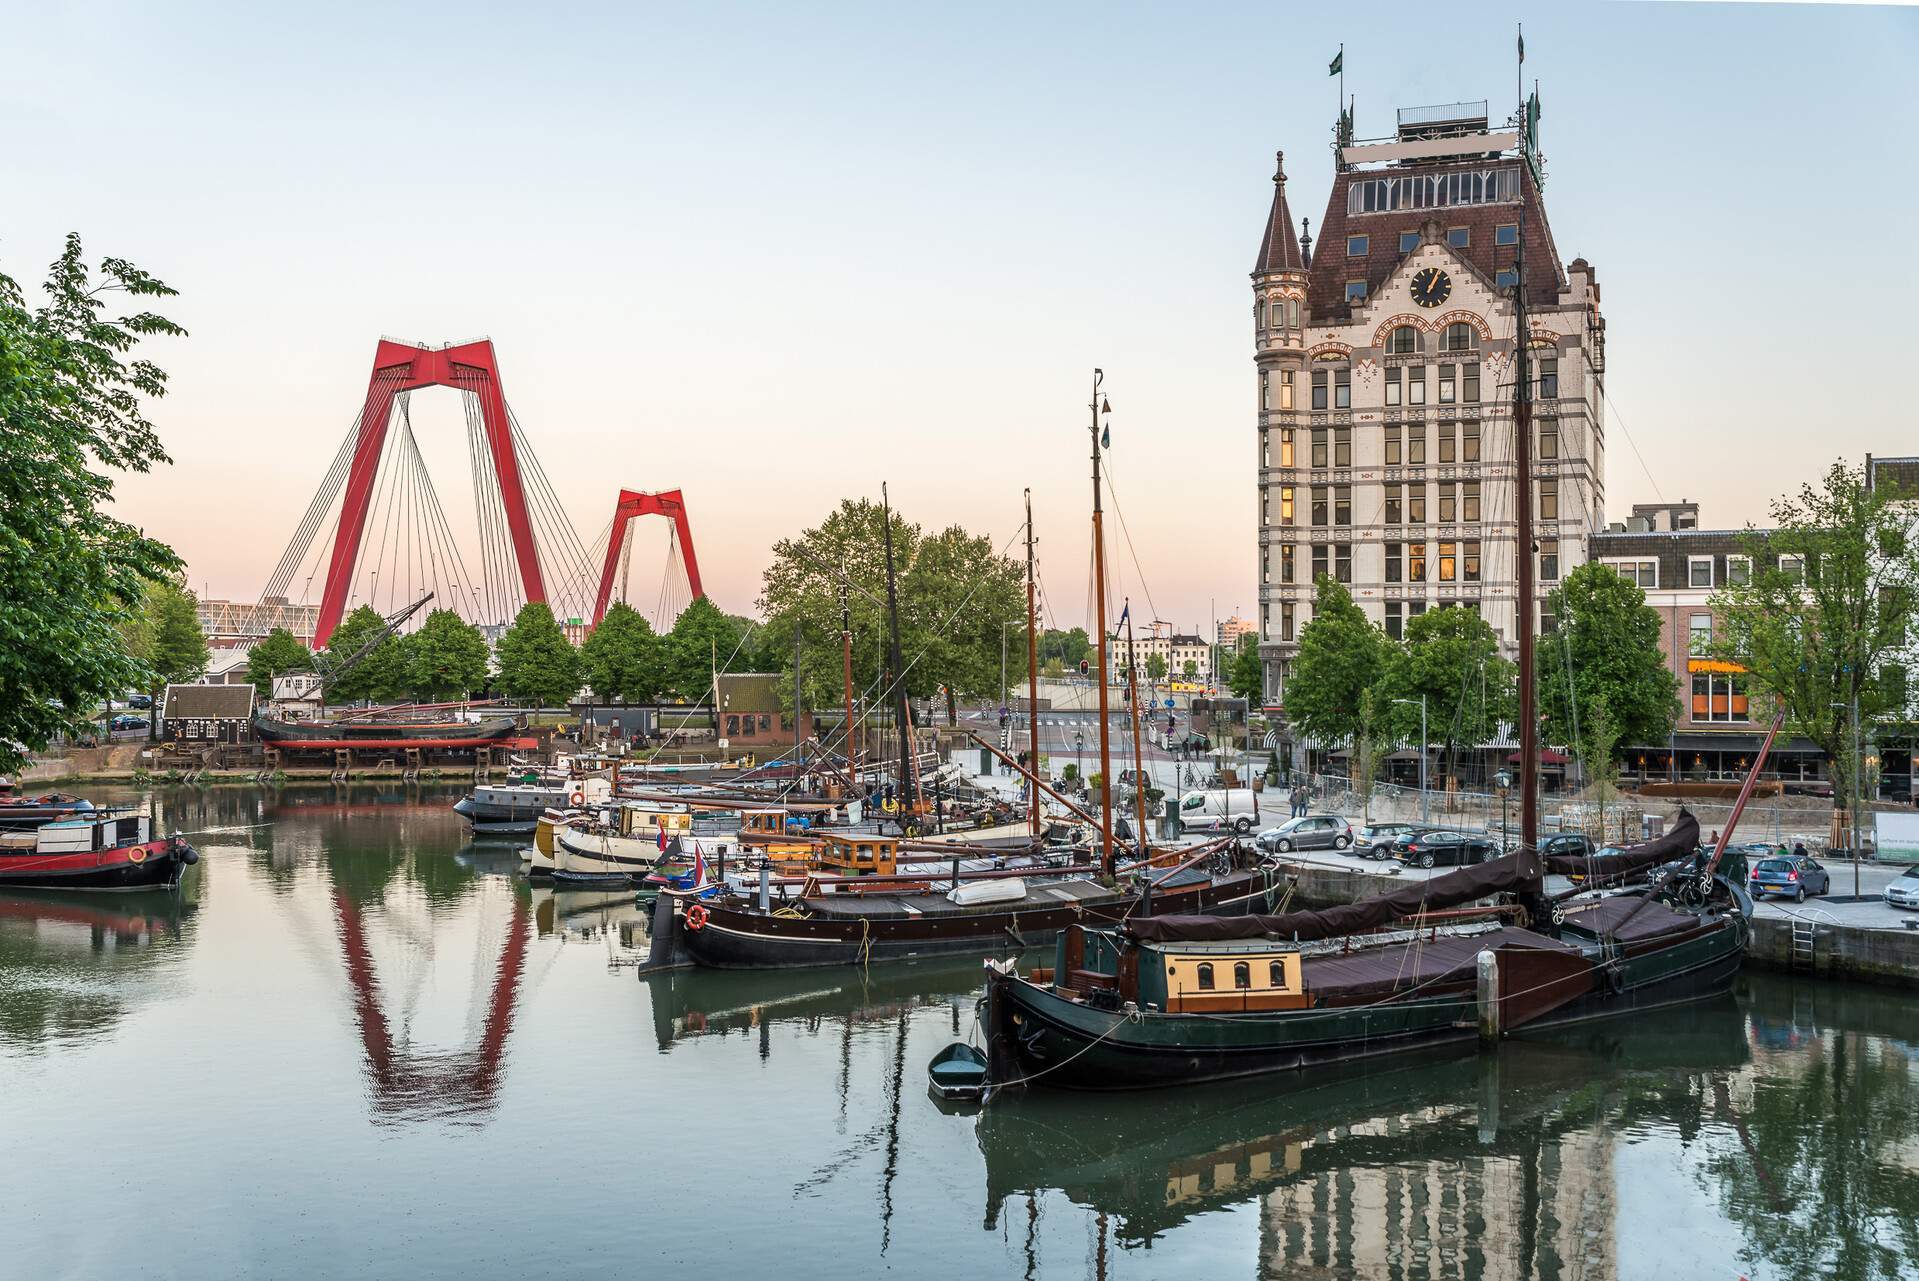 Old ships moored in a historic harbour with a view of an art nouveau building against the scenic twilight sky.